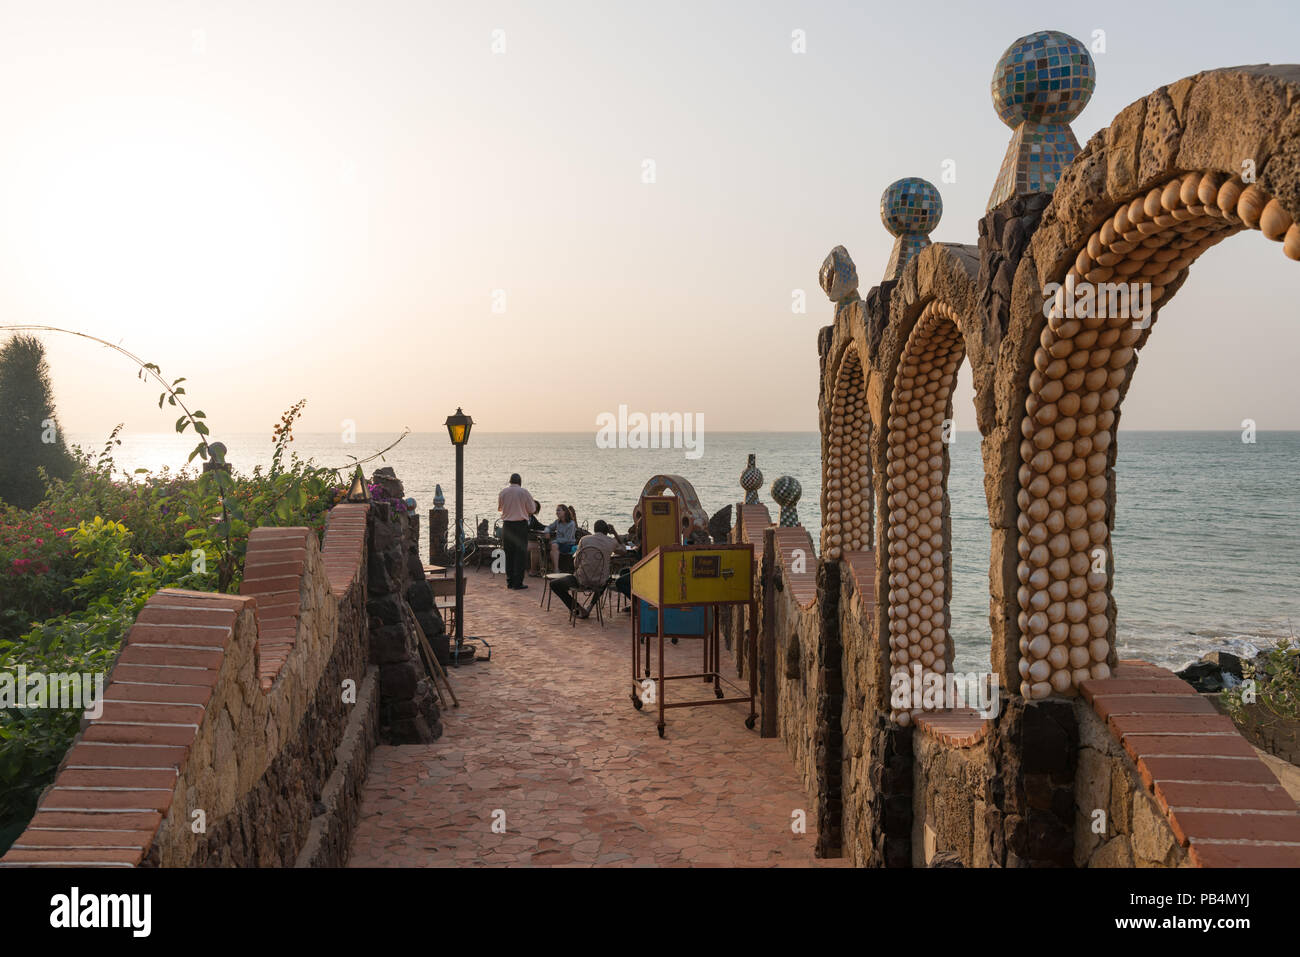 Architectural details at Sobo Bade in Toubab Dialoa in Senegal, Africa Stock Photo